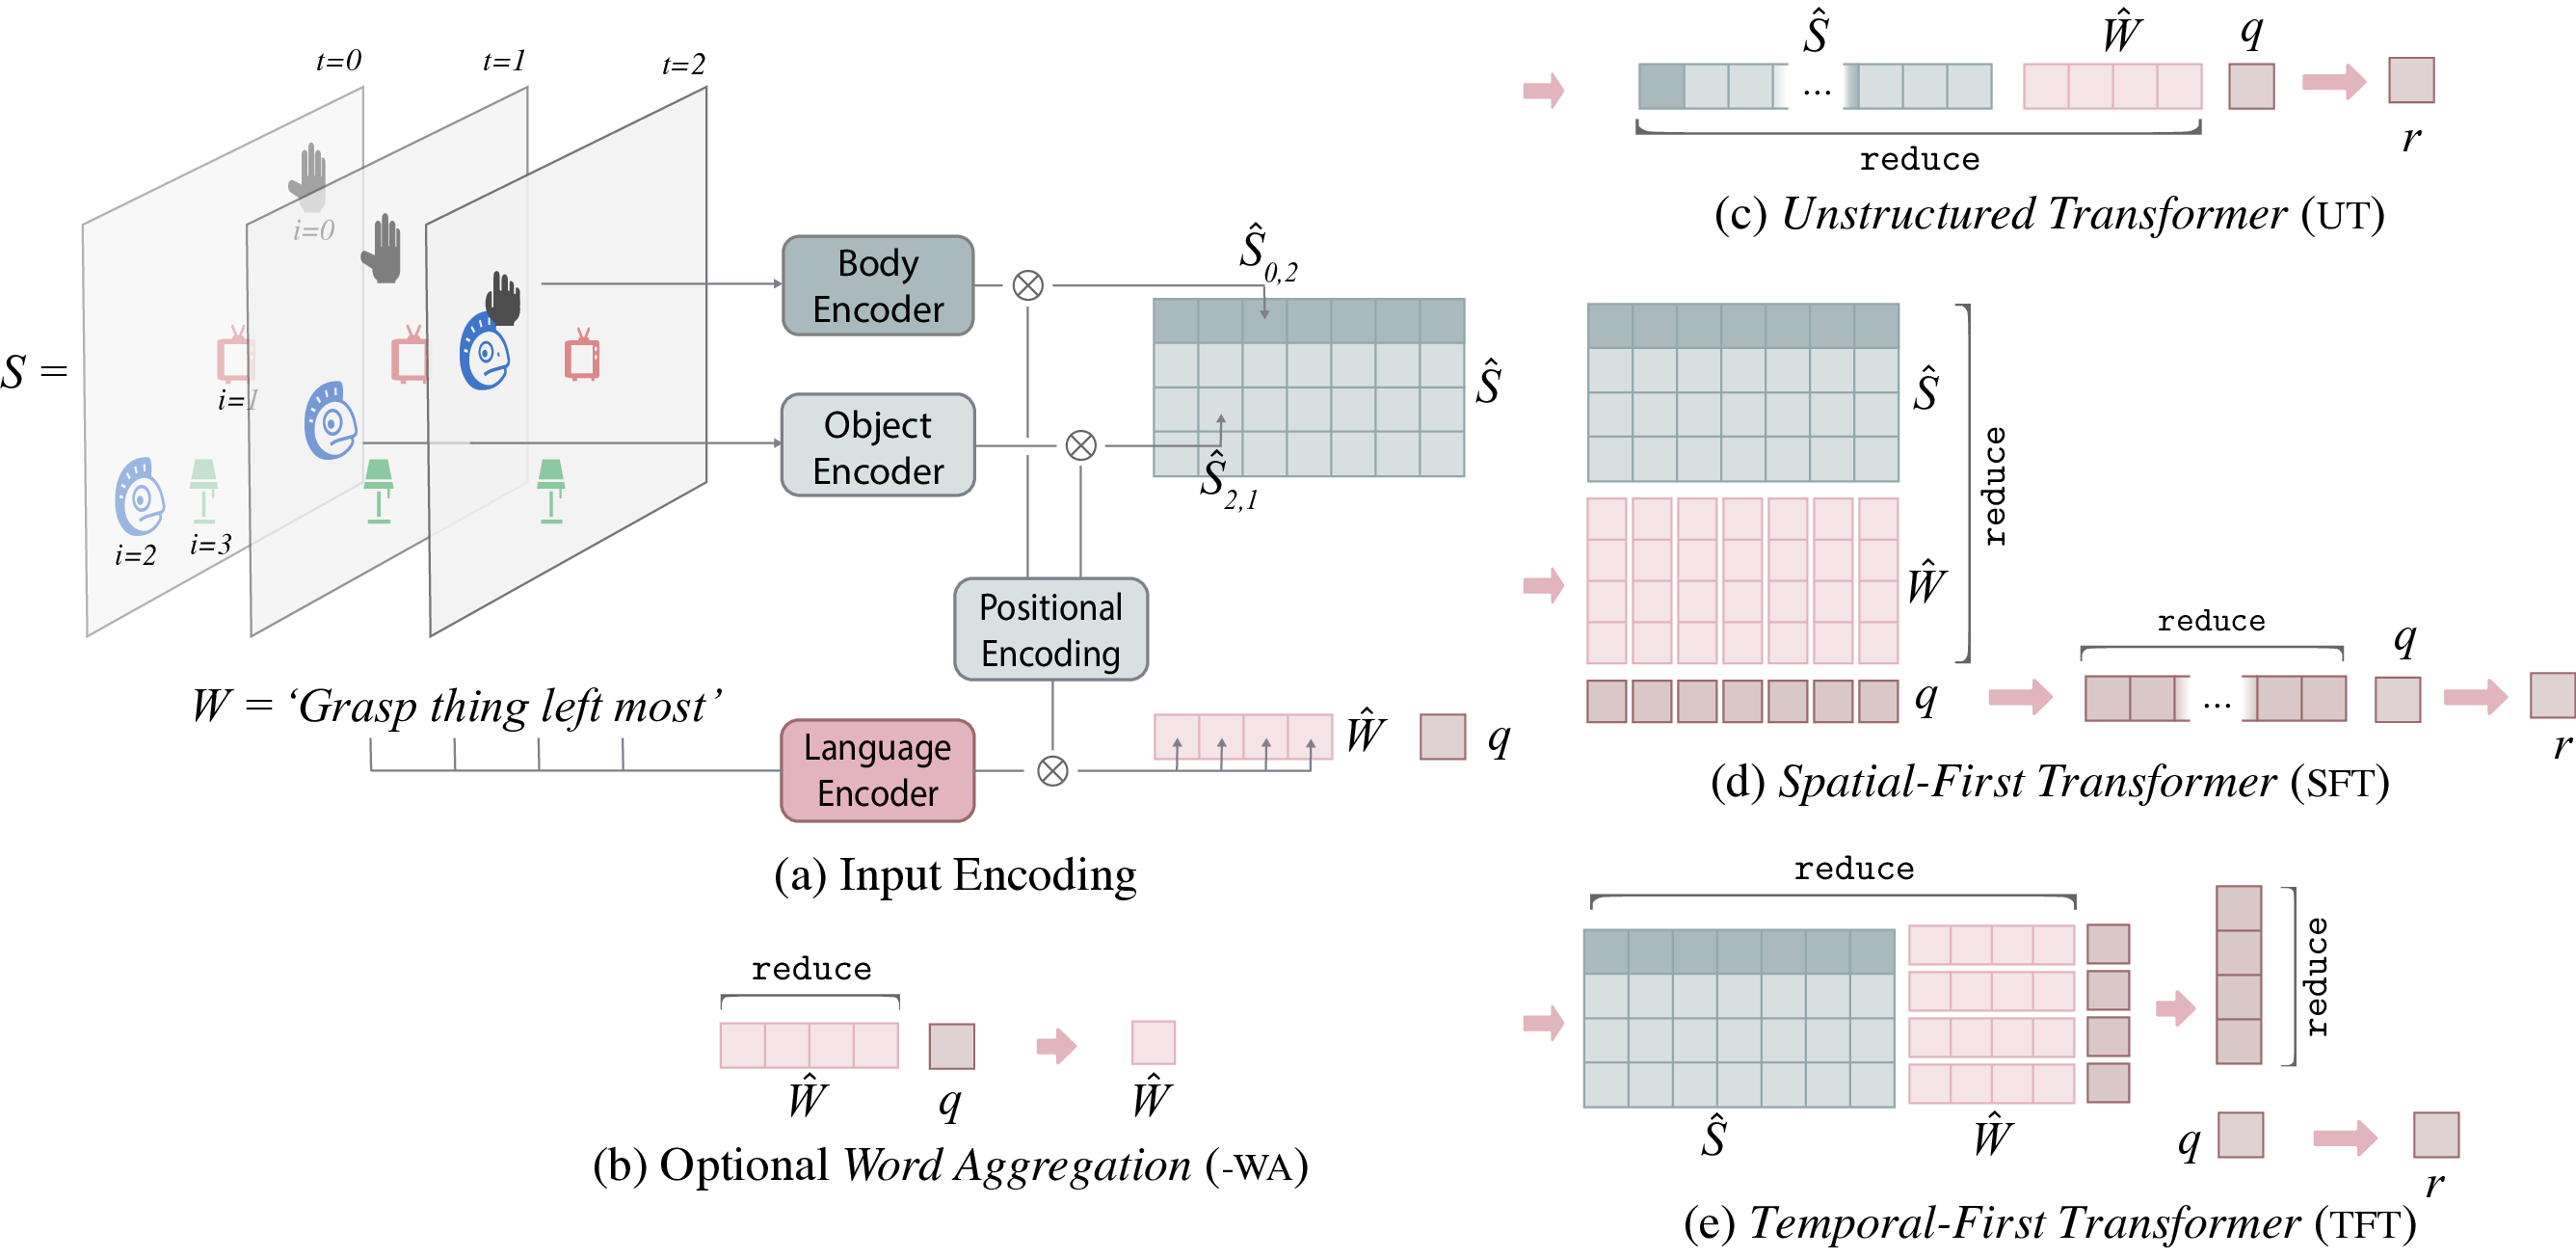 Architectures used in the paper: Unstructured Transformer (UT), Spatial-First Transformer (SFT), Temporal-First Transformer (TFT), and LSTM baseline architectures (not represented).